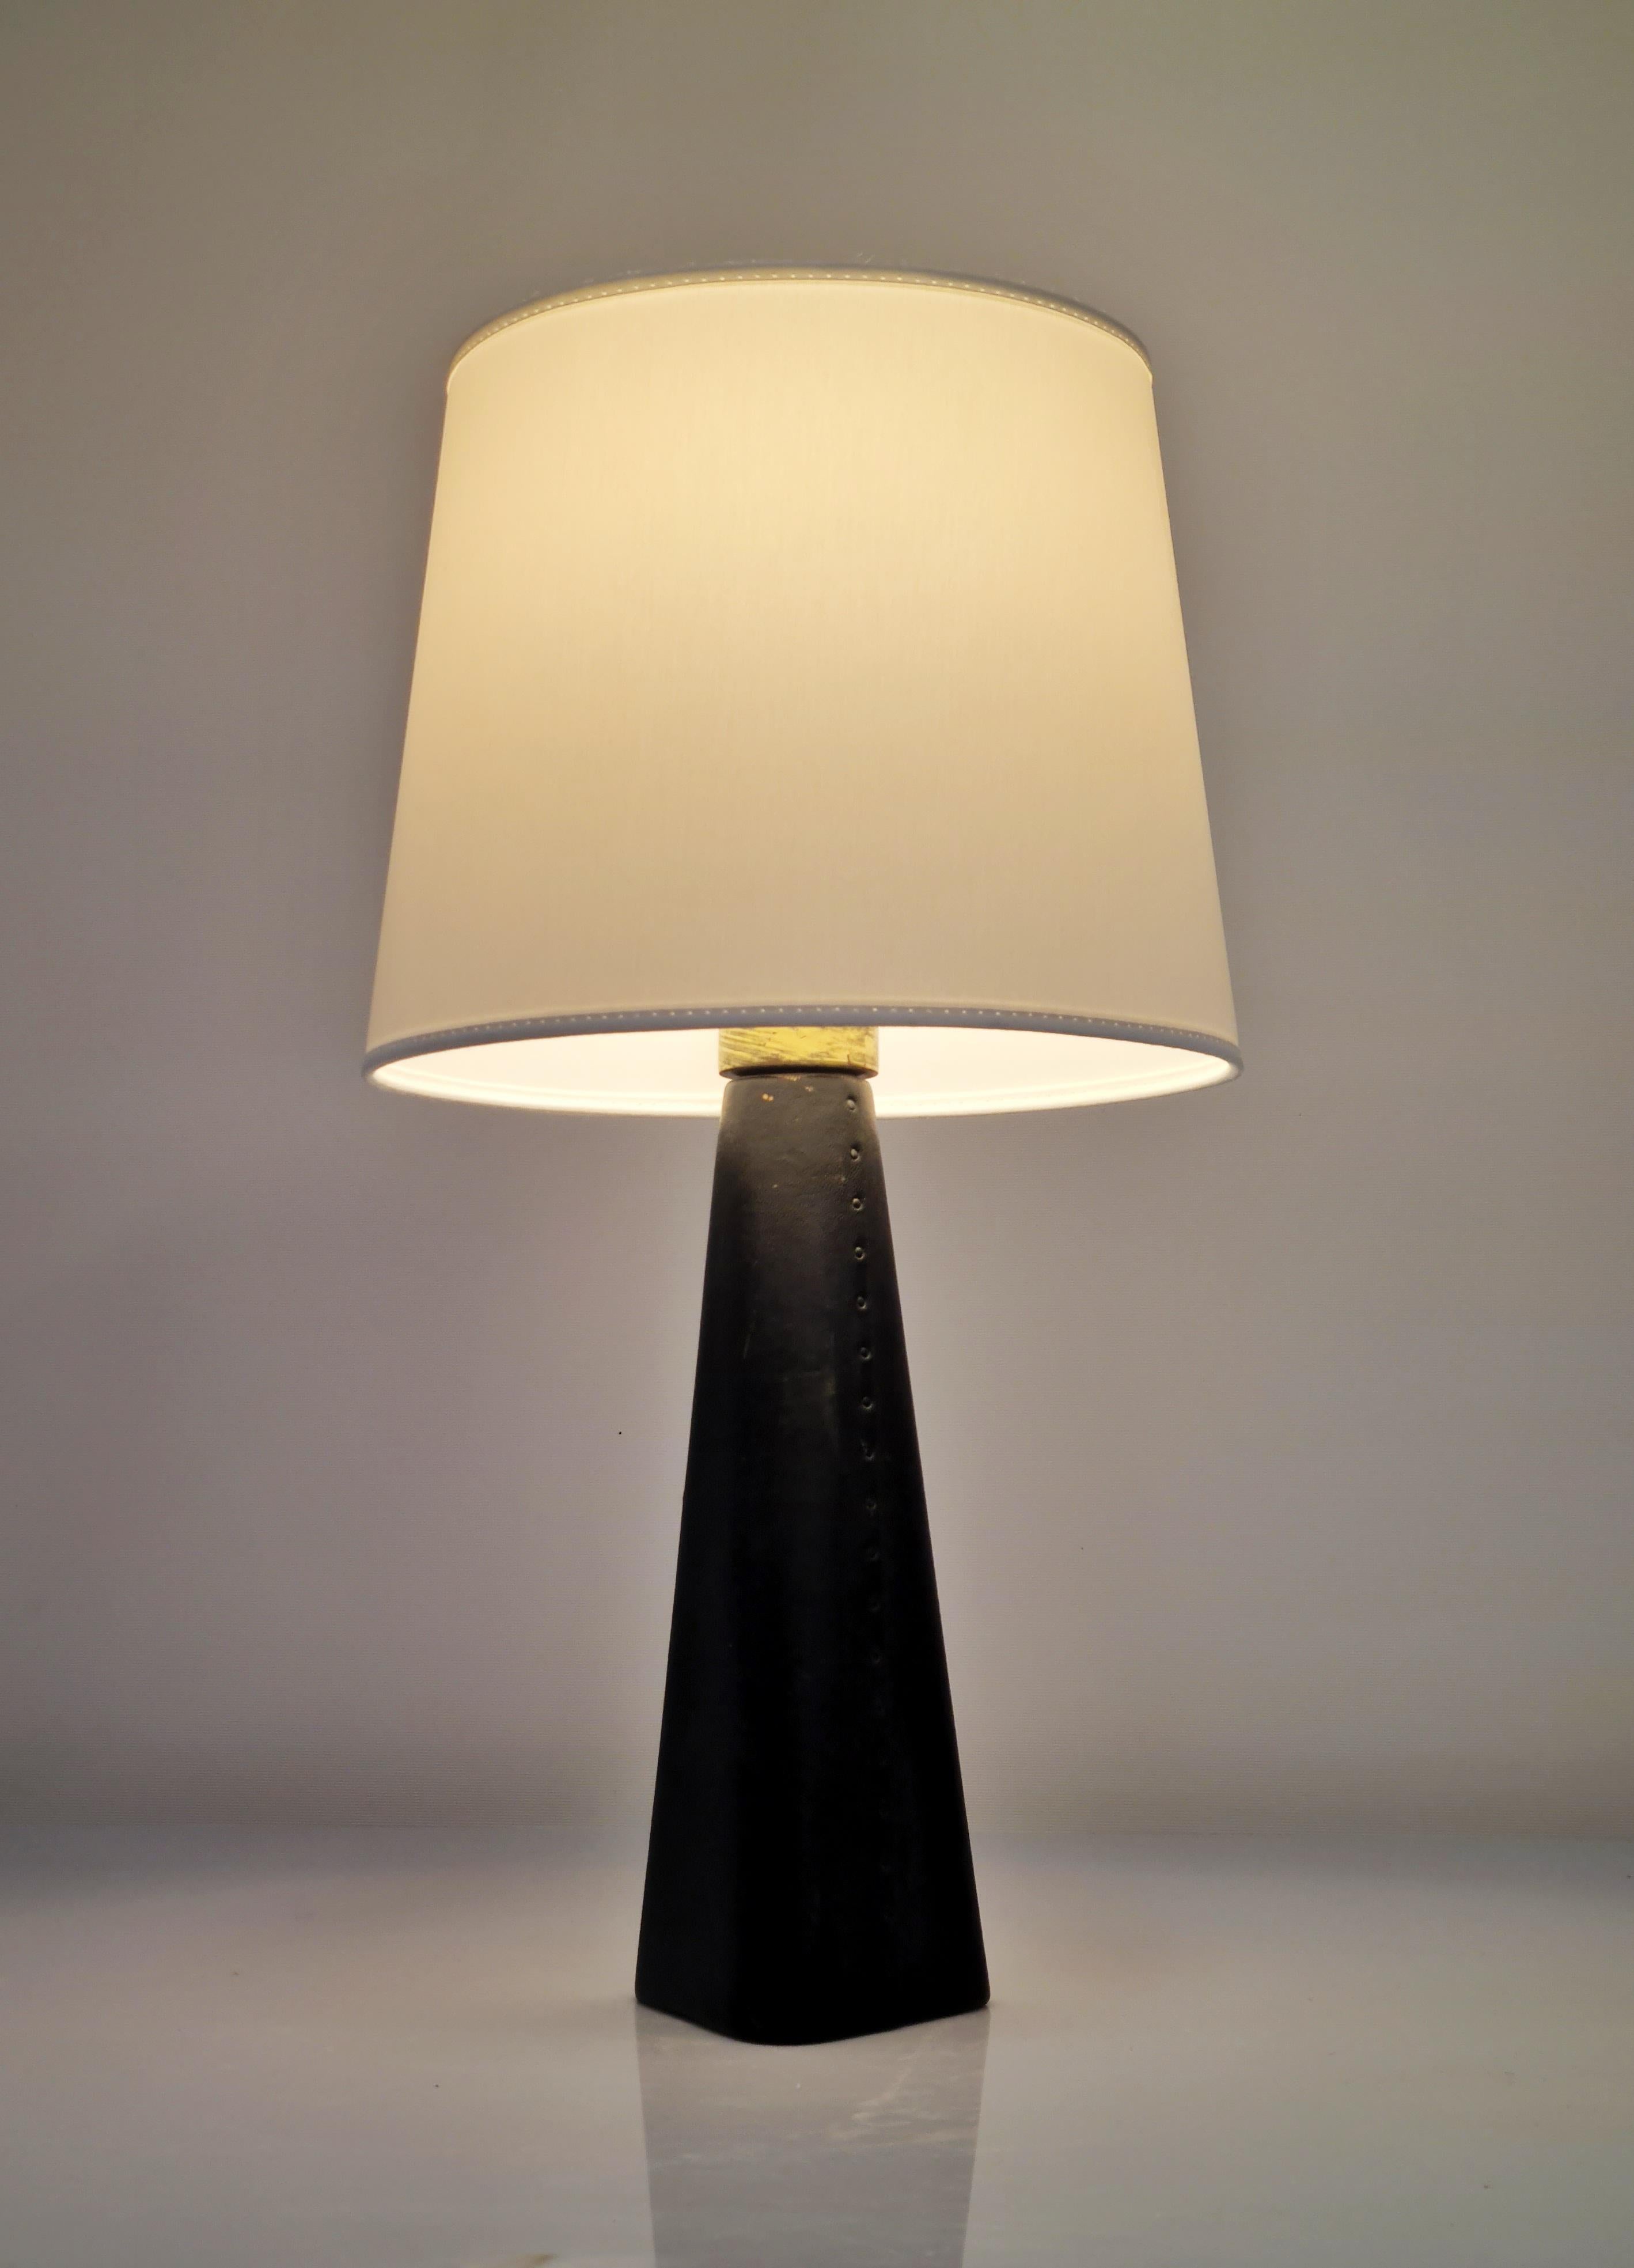 Lisa Johansson-Papé Table Lamp 46-186 LJP in Leather and Silk, Orno For Sale 4